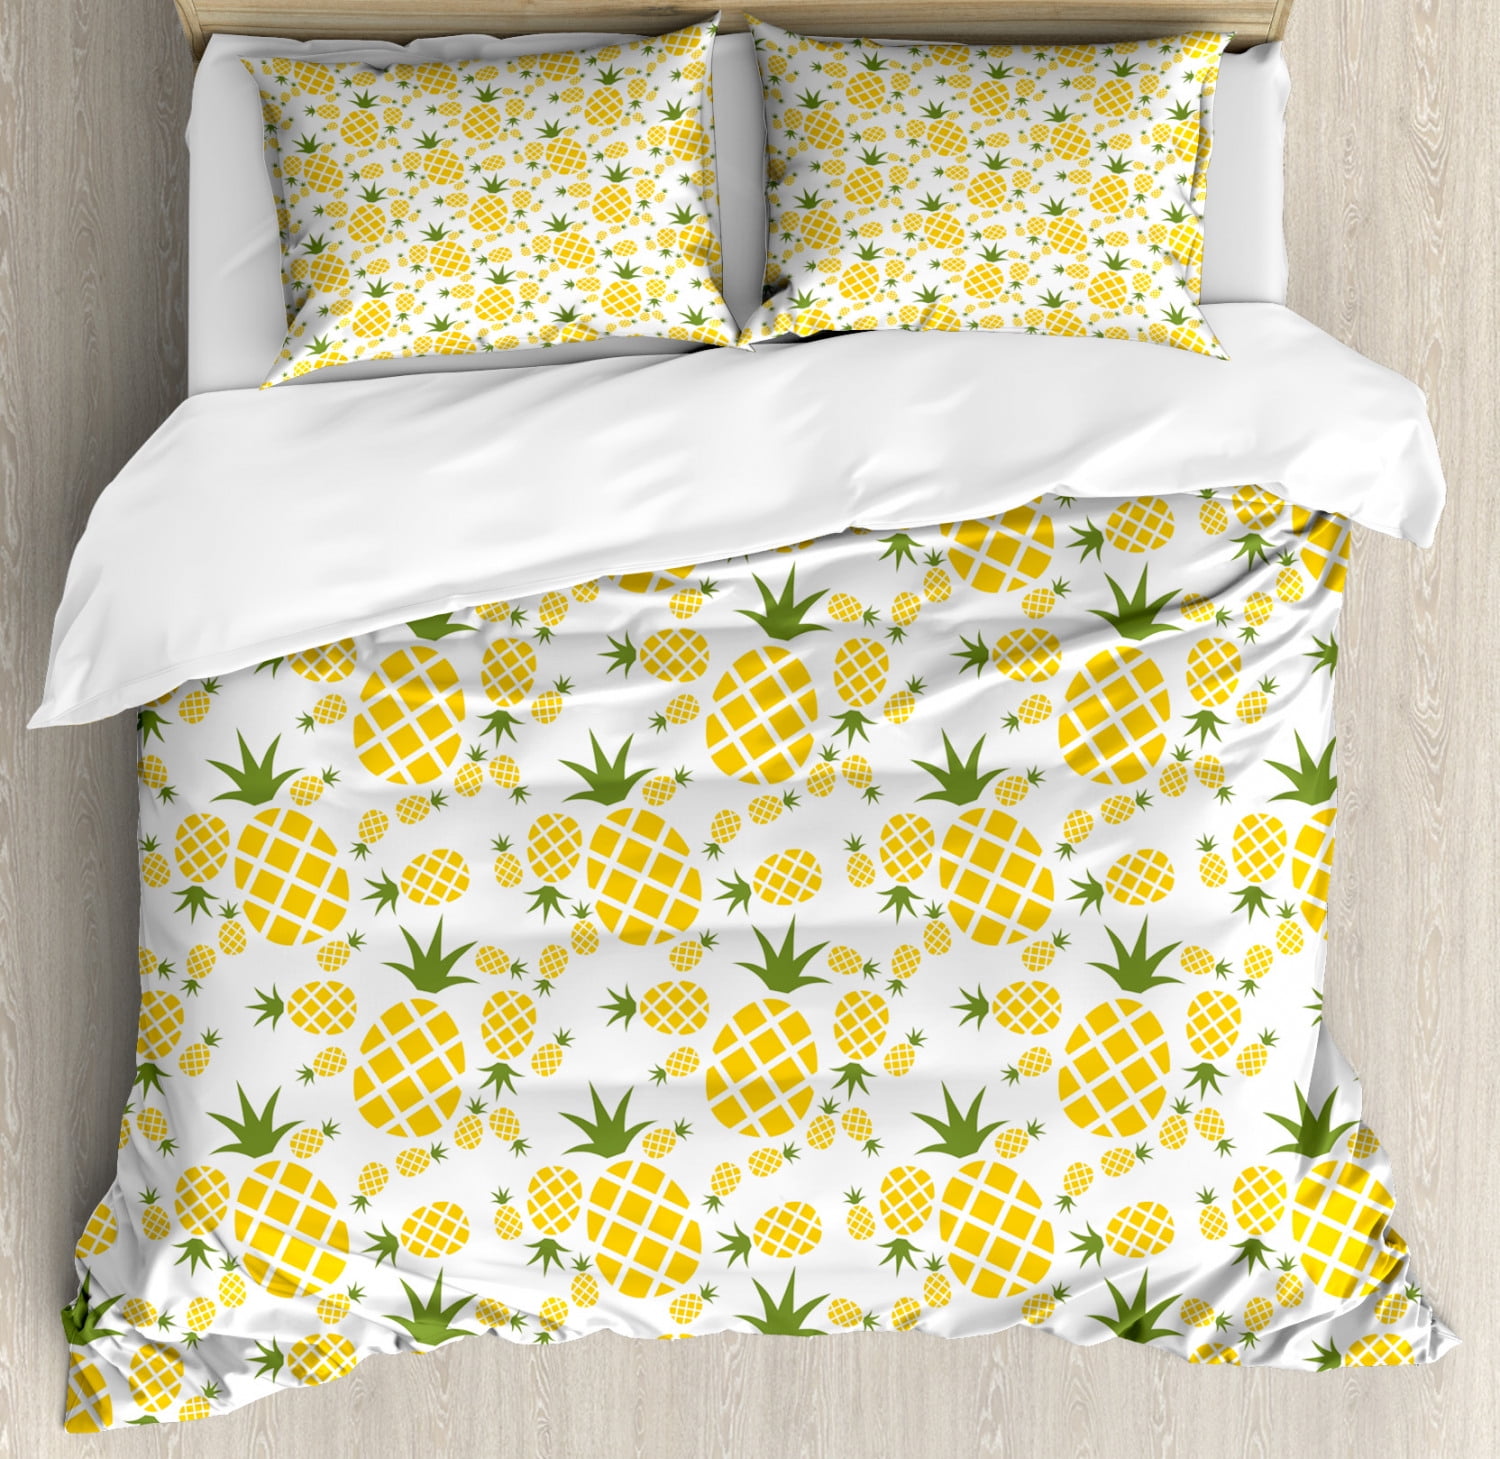 Green And Yellow Duvet Cover Set Rhombus Pineapple With Blooming